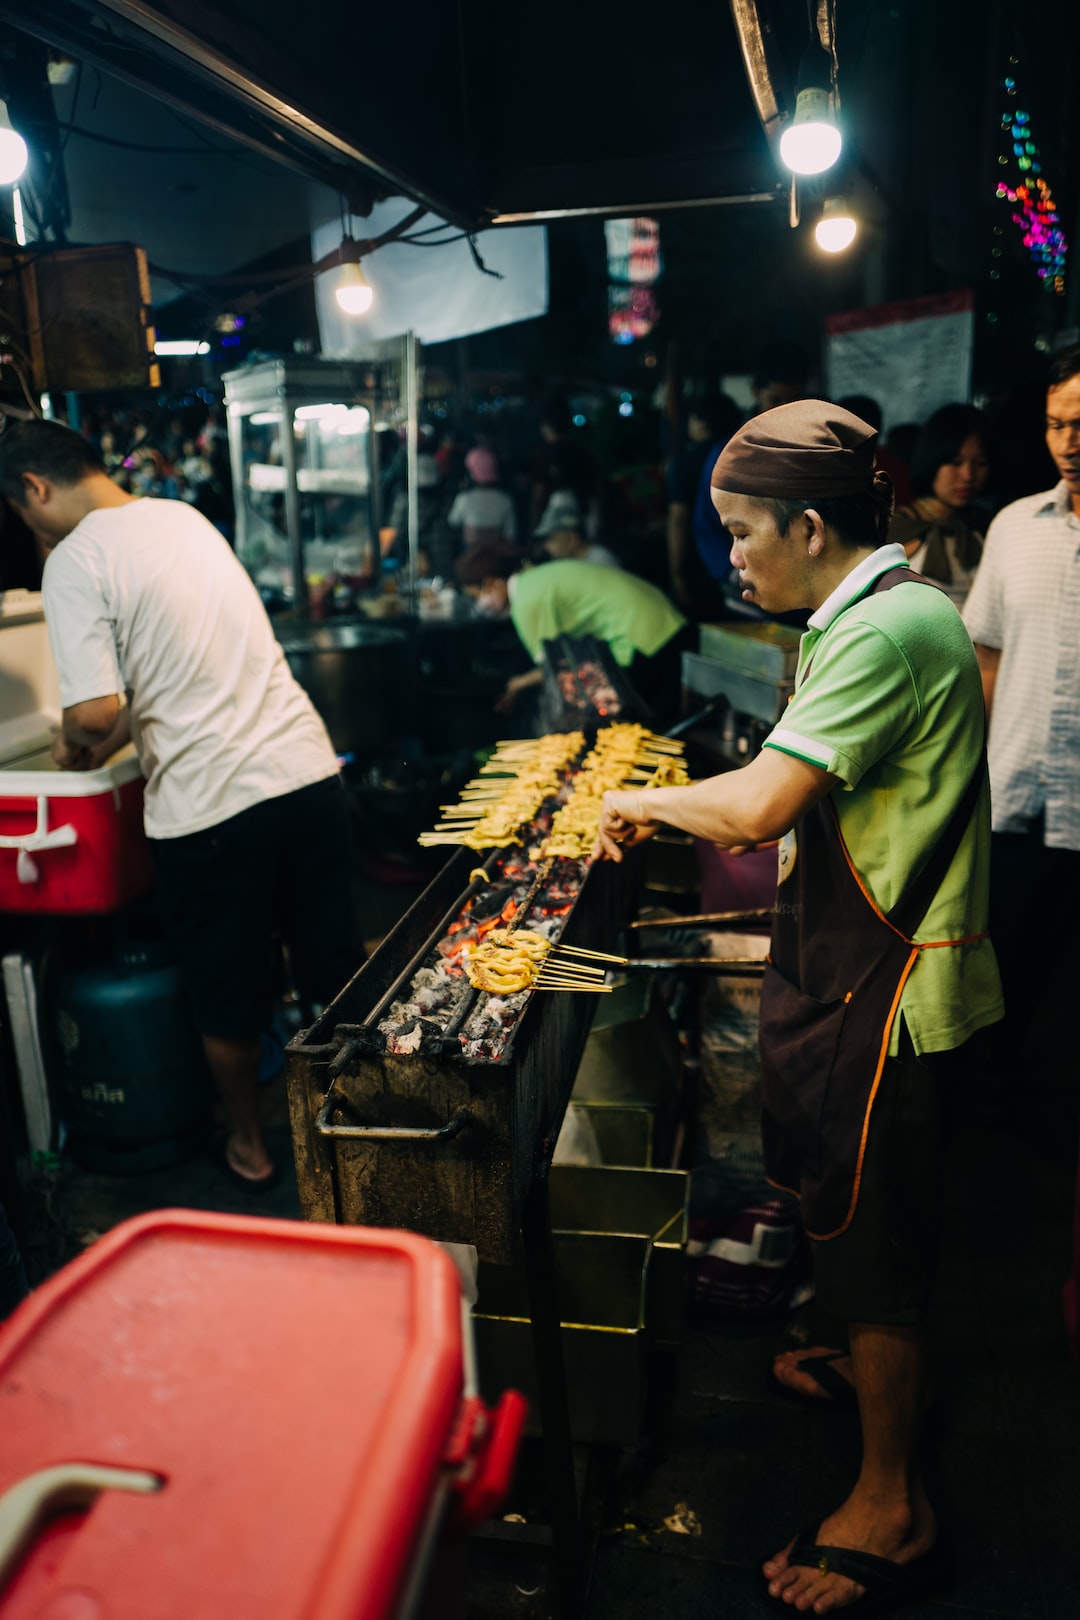 The Asian Street Food Scene and Its Global Presence